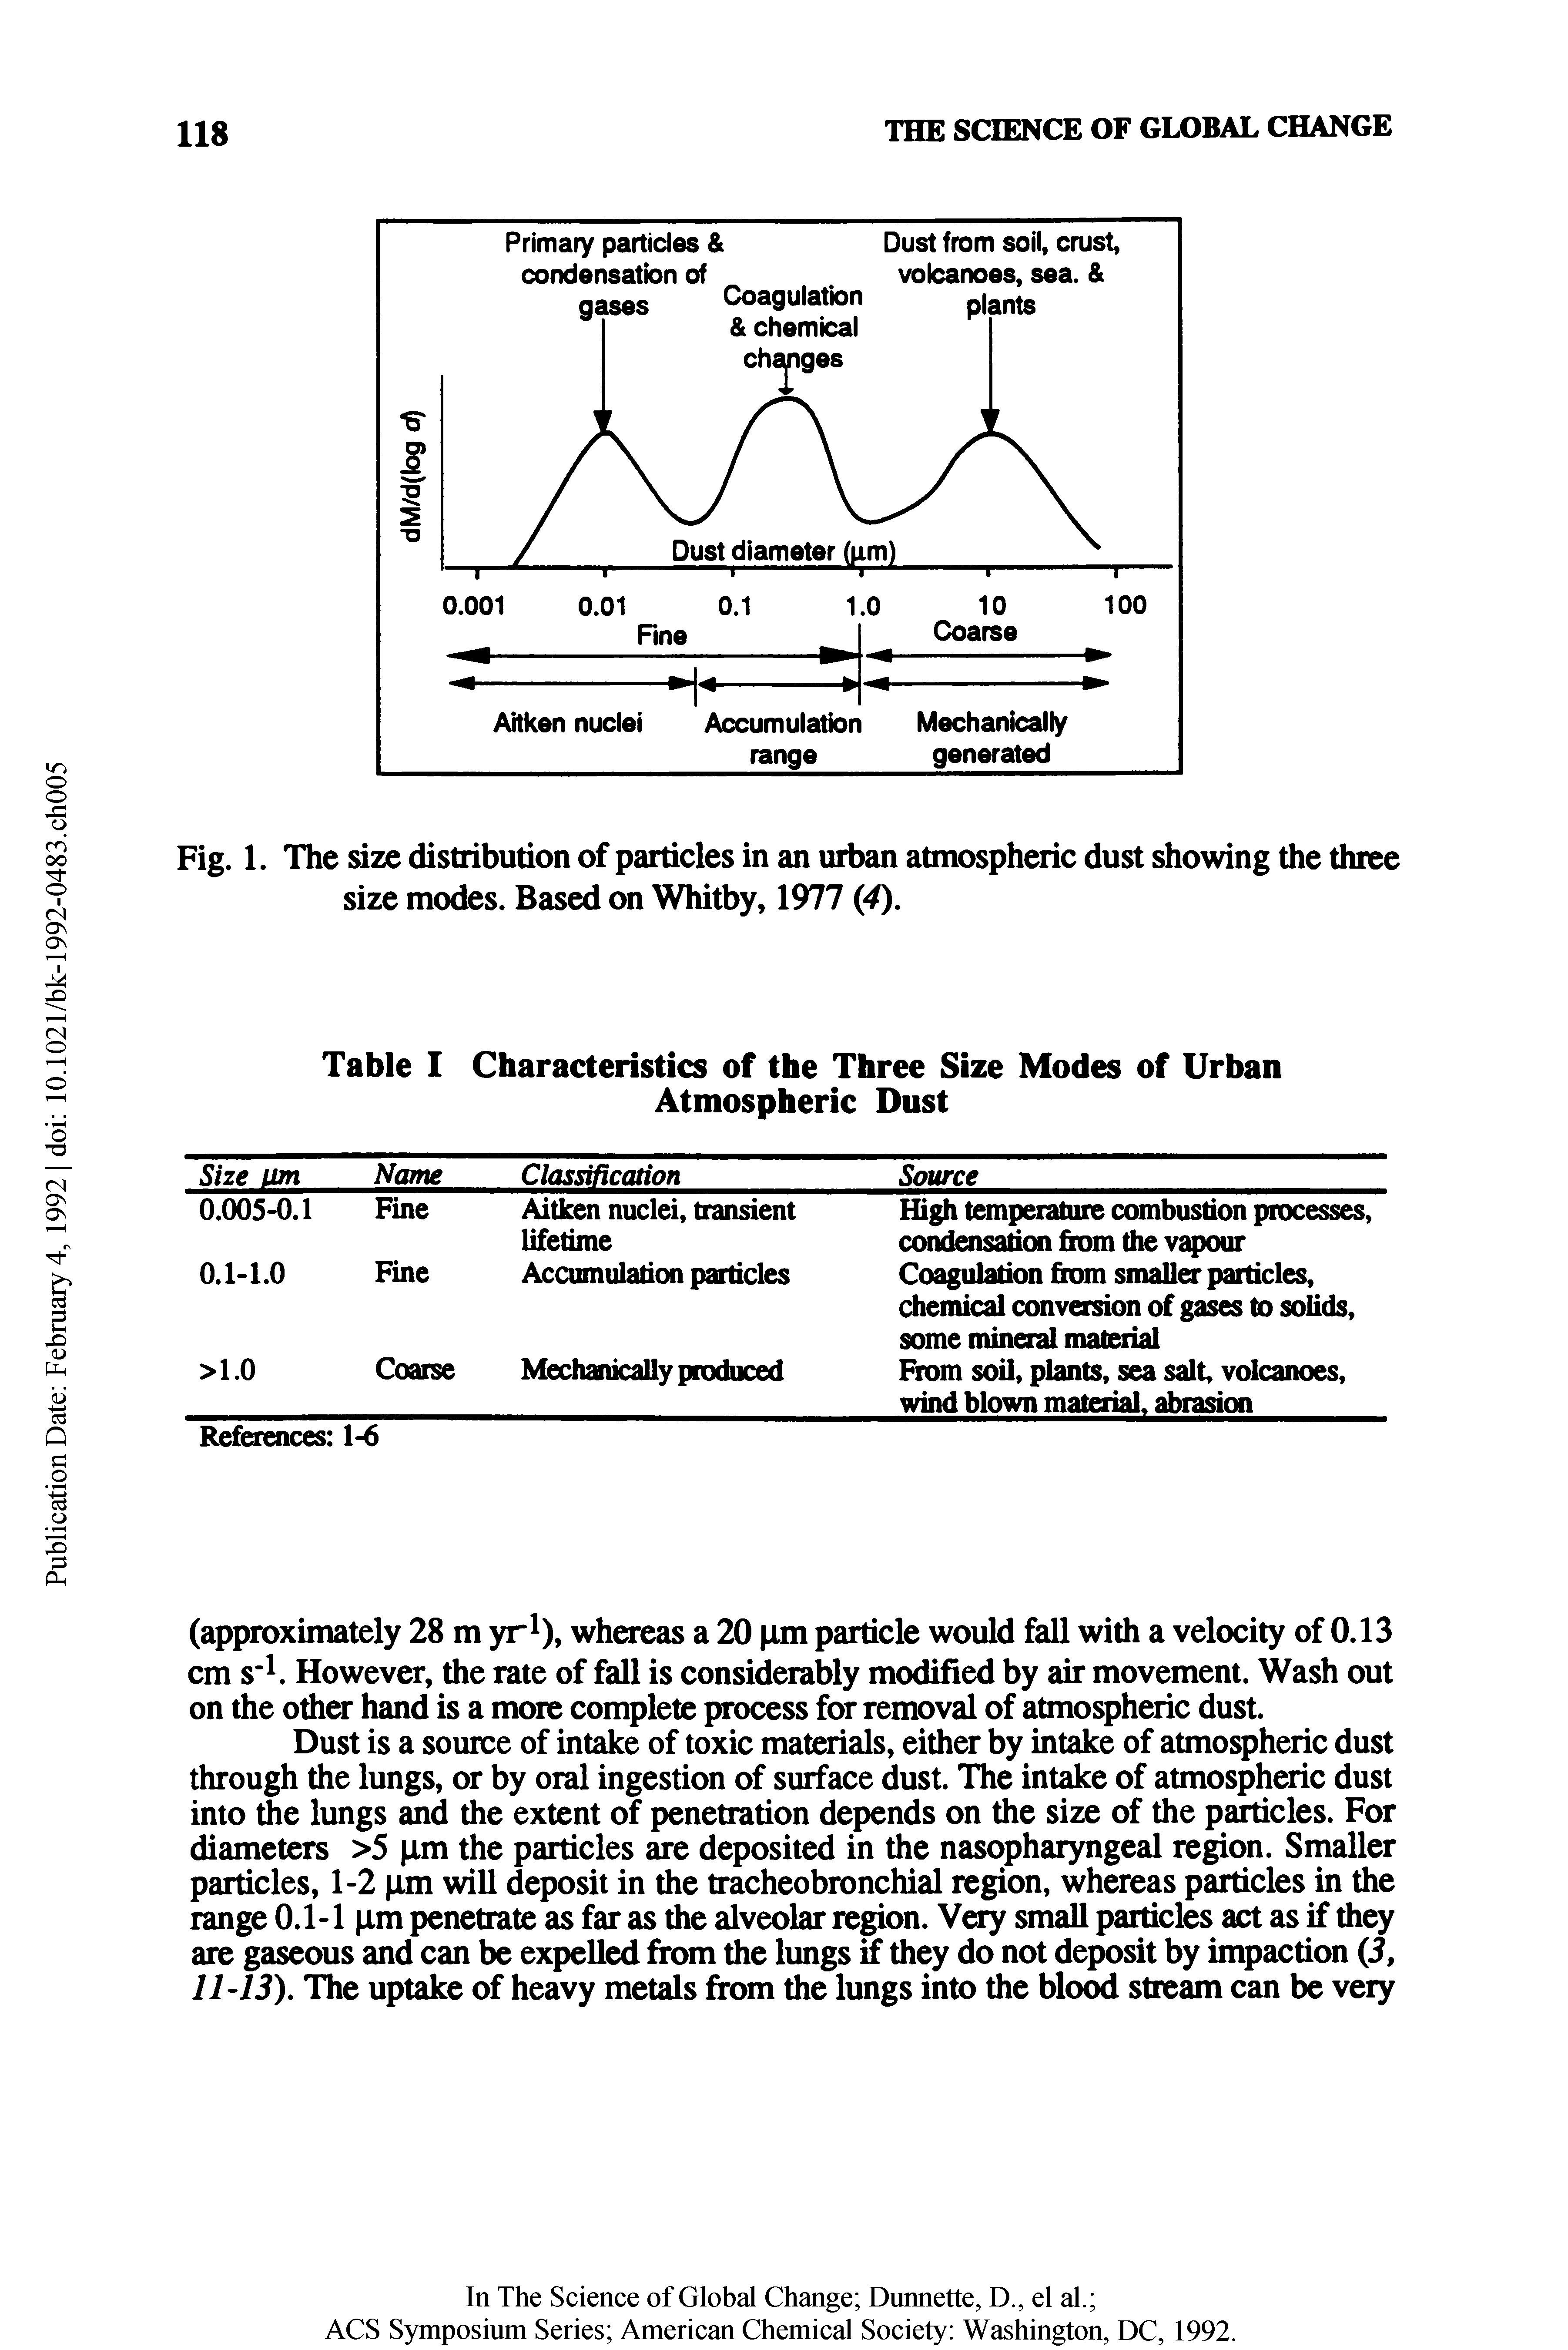 Fig. 1. The size distribution of particles in an urban atmospheric dust showing the three size modes. Based on Whitby, 1977 4).